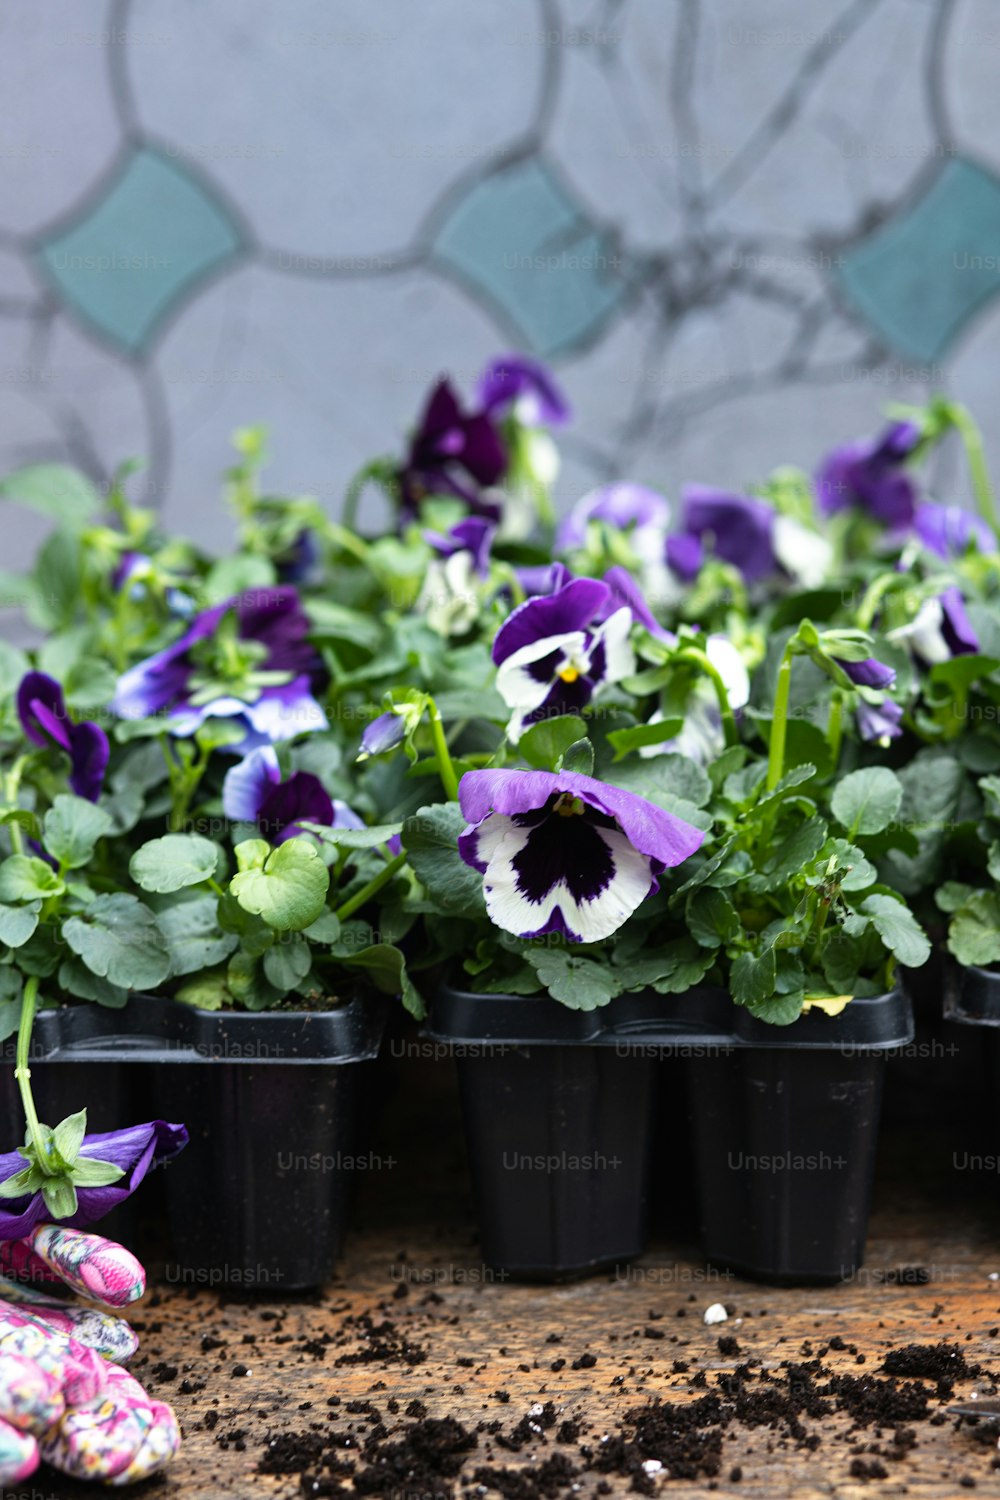 a group of pansies with purple and white flowers